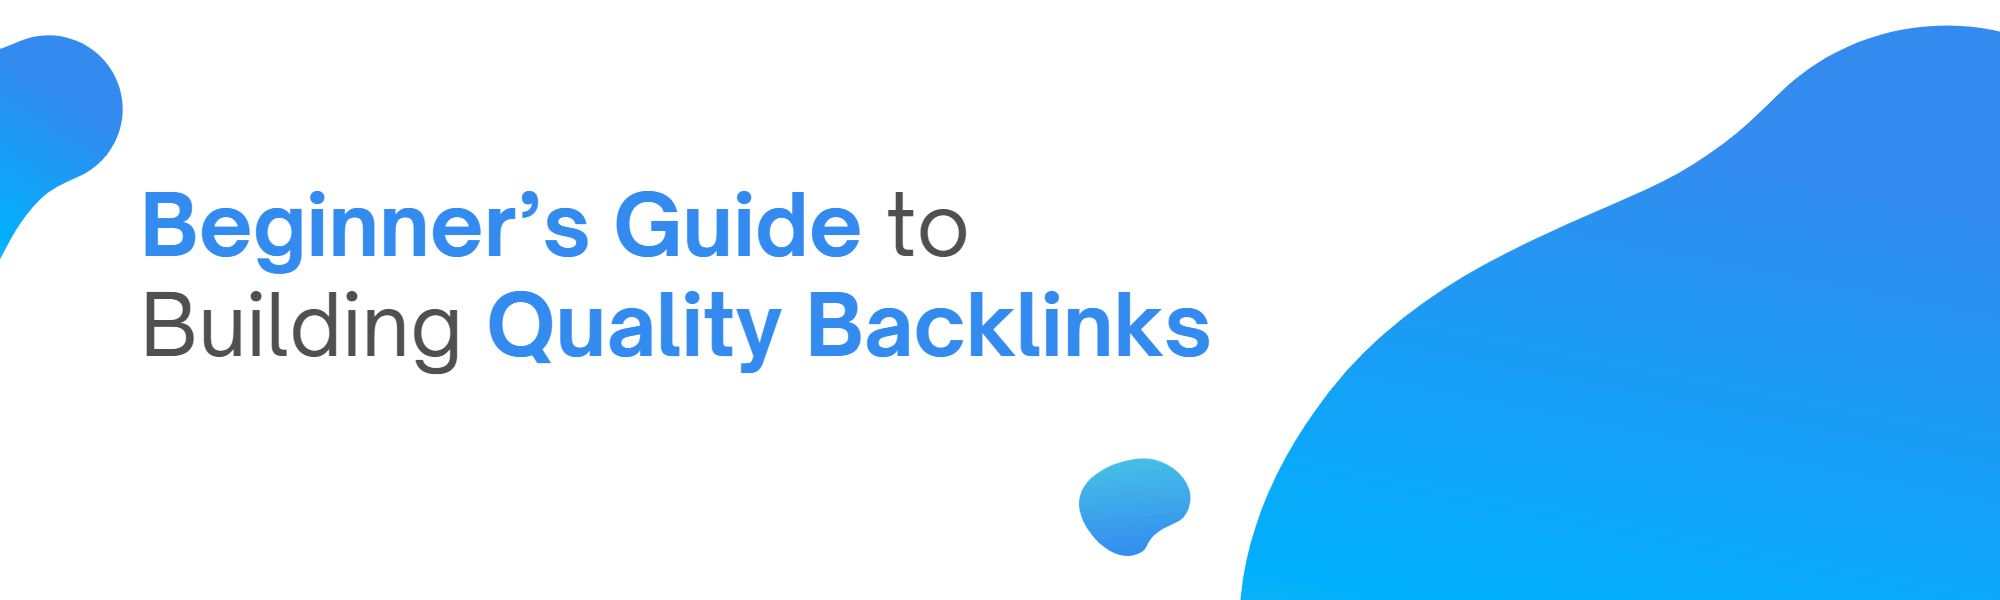 Guide to Building Quality Backlinks